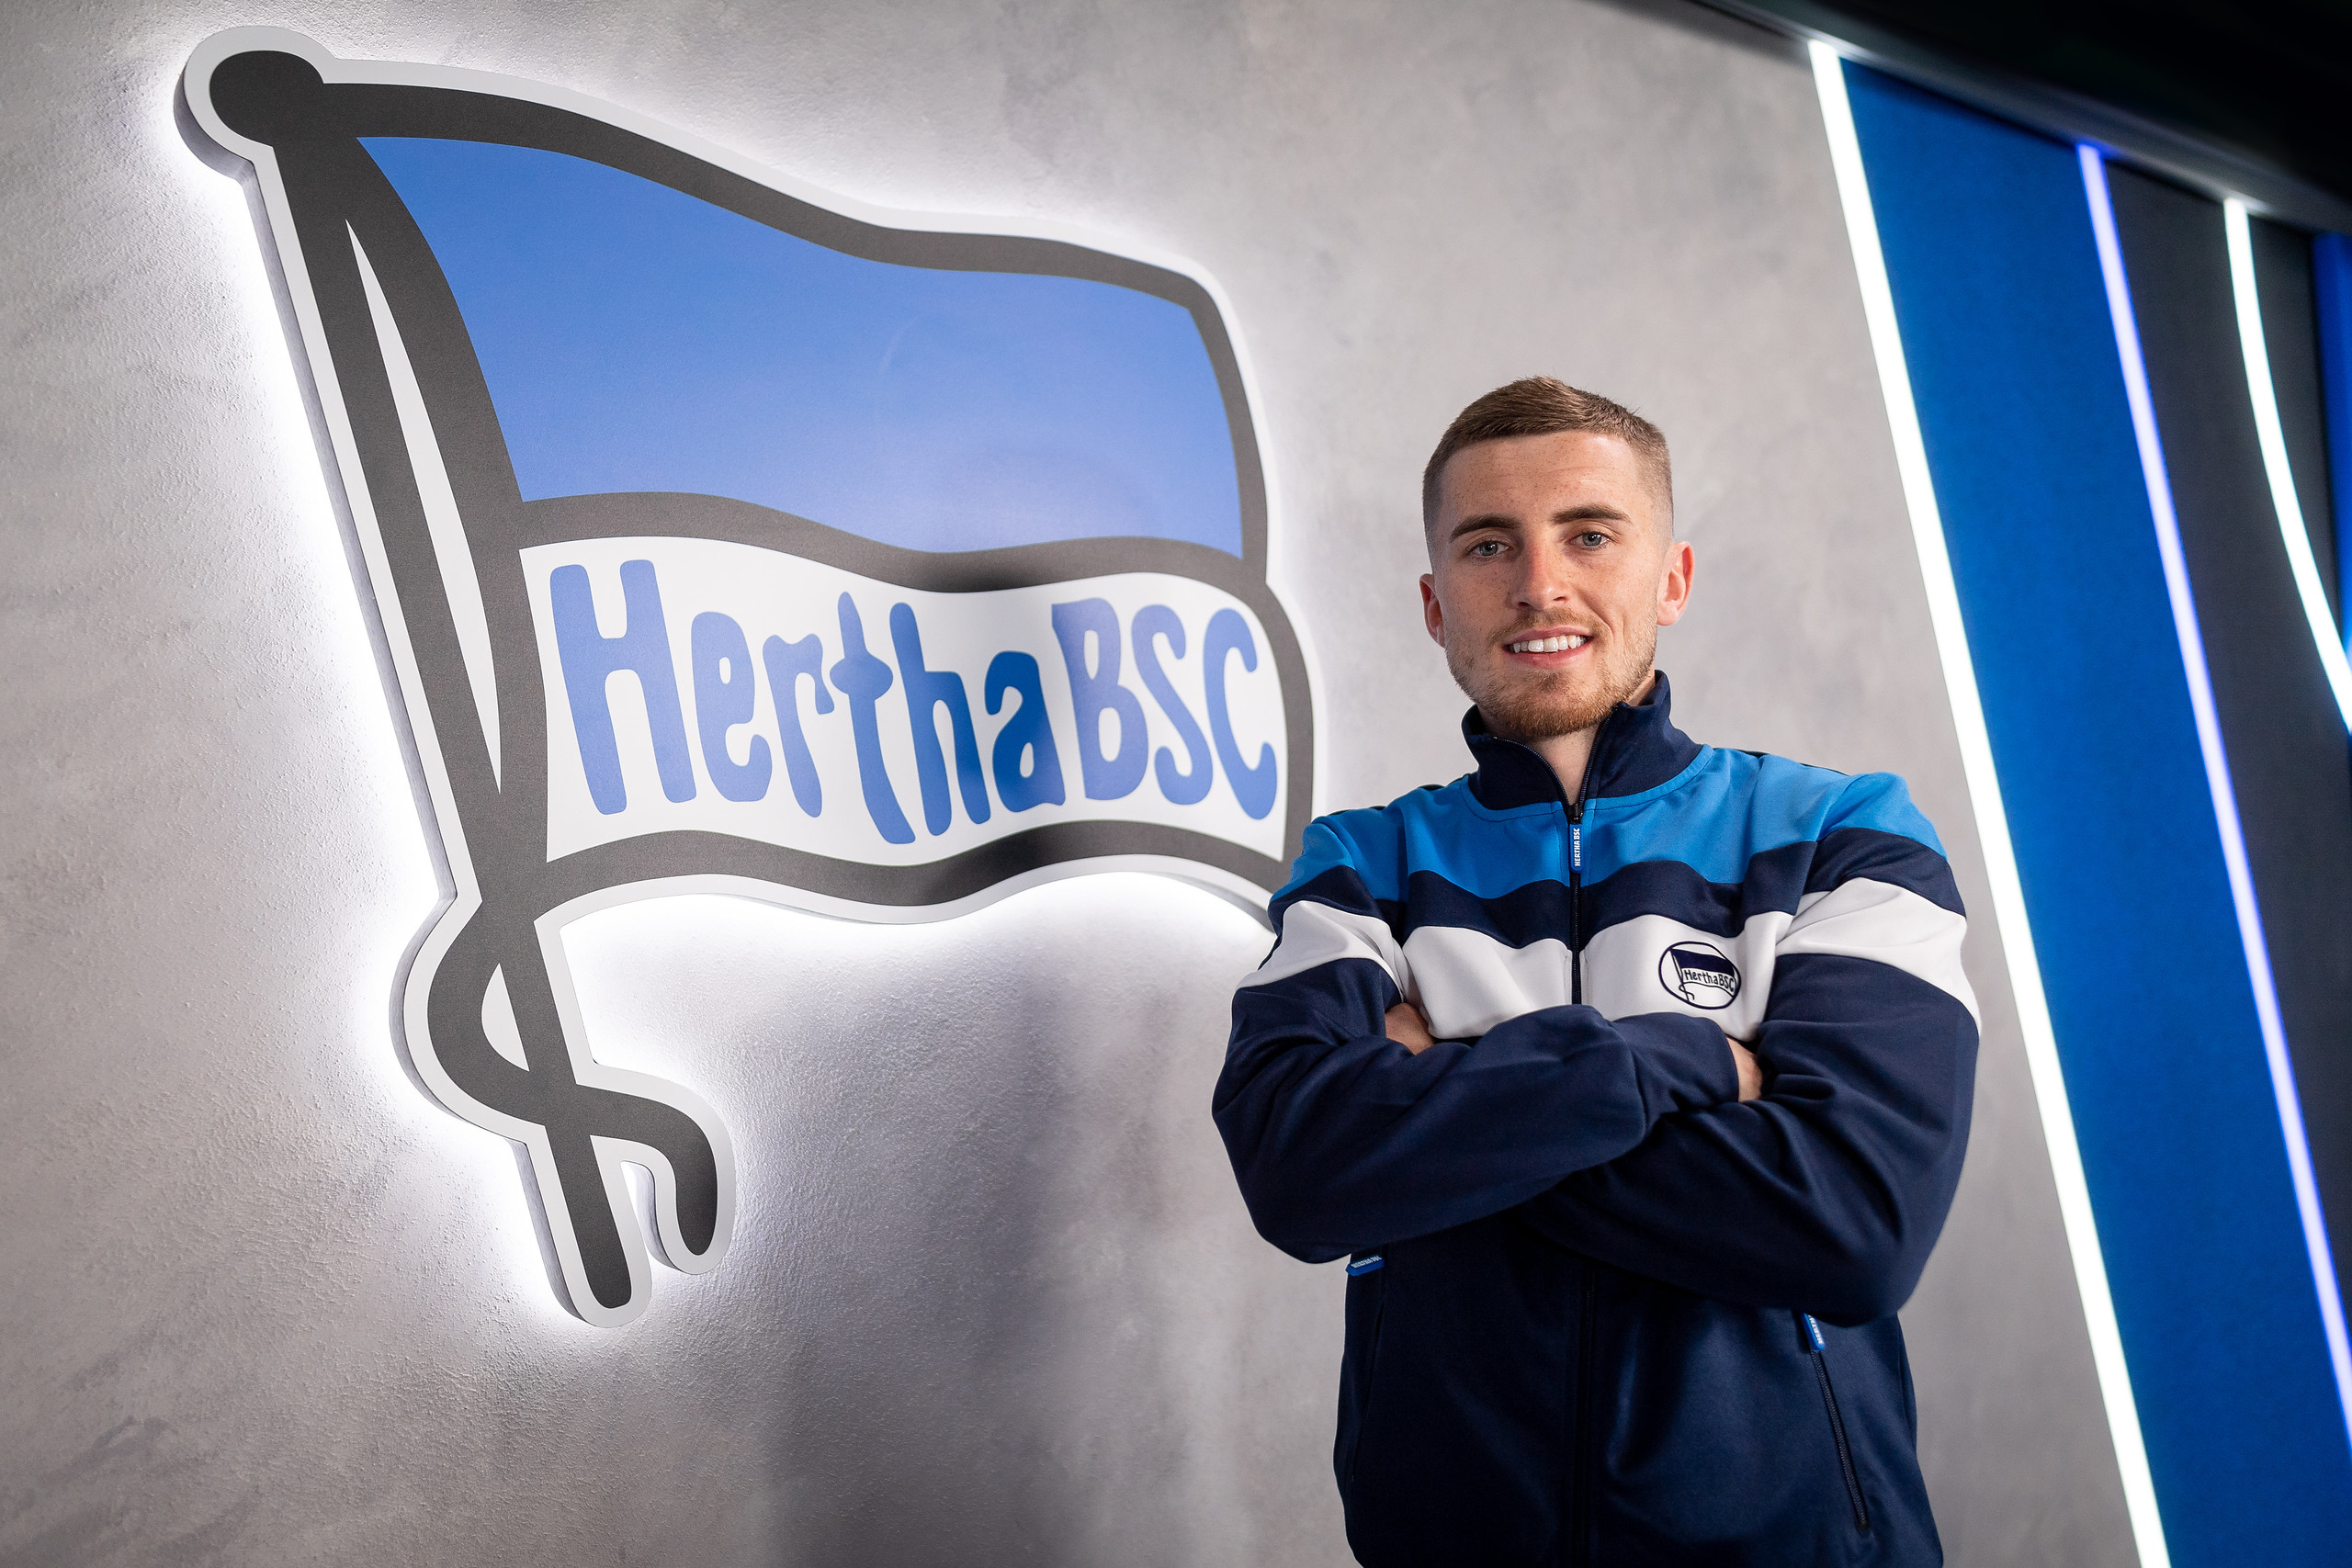 Jonjoe Kenny in front of the Hertha badge